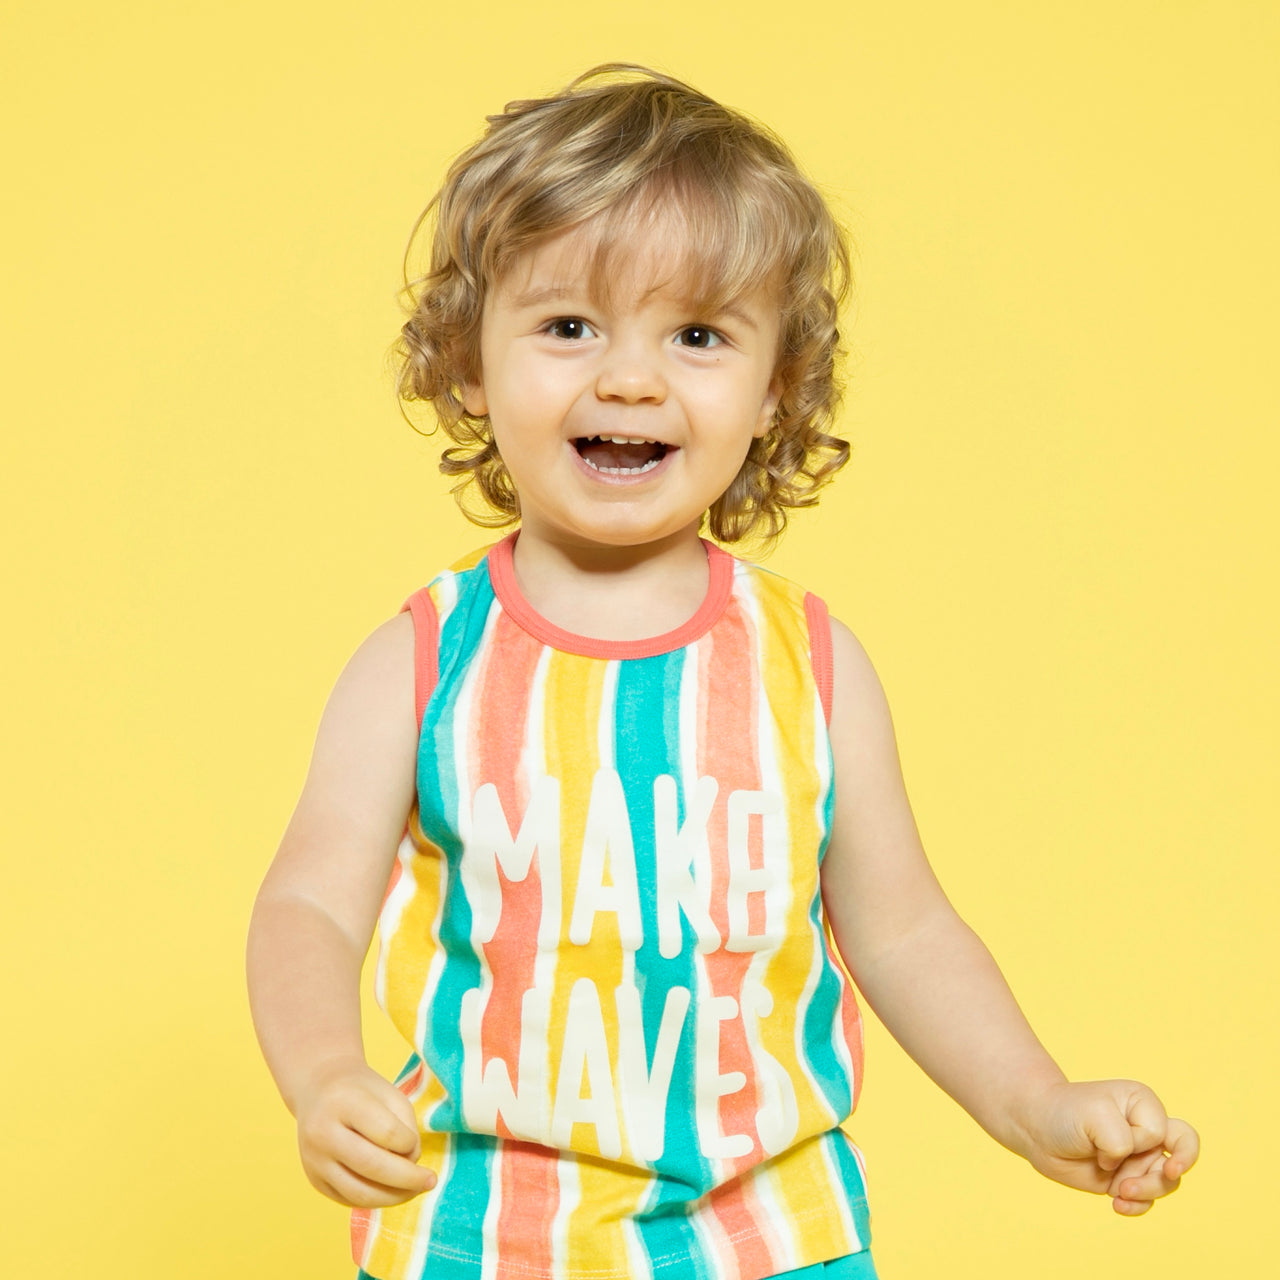 Get Wavy! Baby and Children's Styles for Beach Adventures